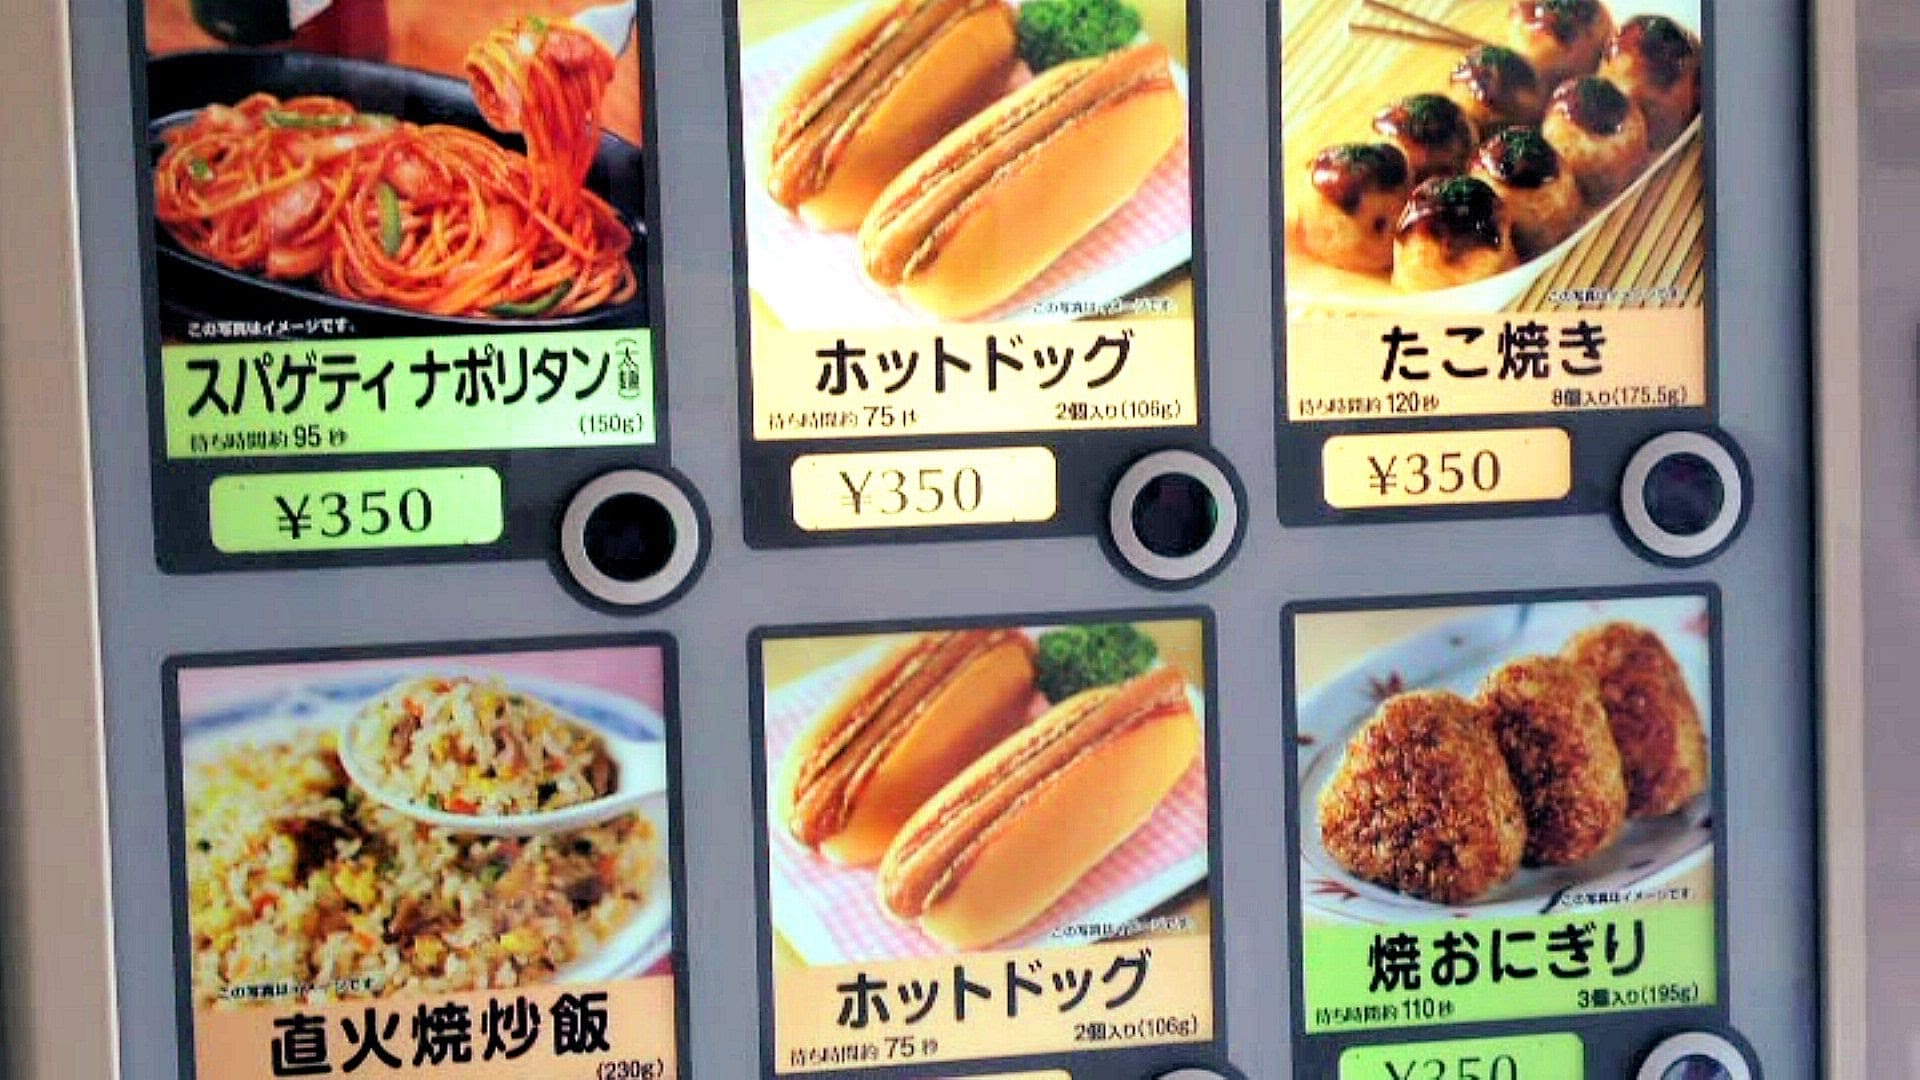 Hot-dogs, burgers etc. Vending machines with these are popular near highways and give you a fast and hot meal.